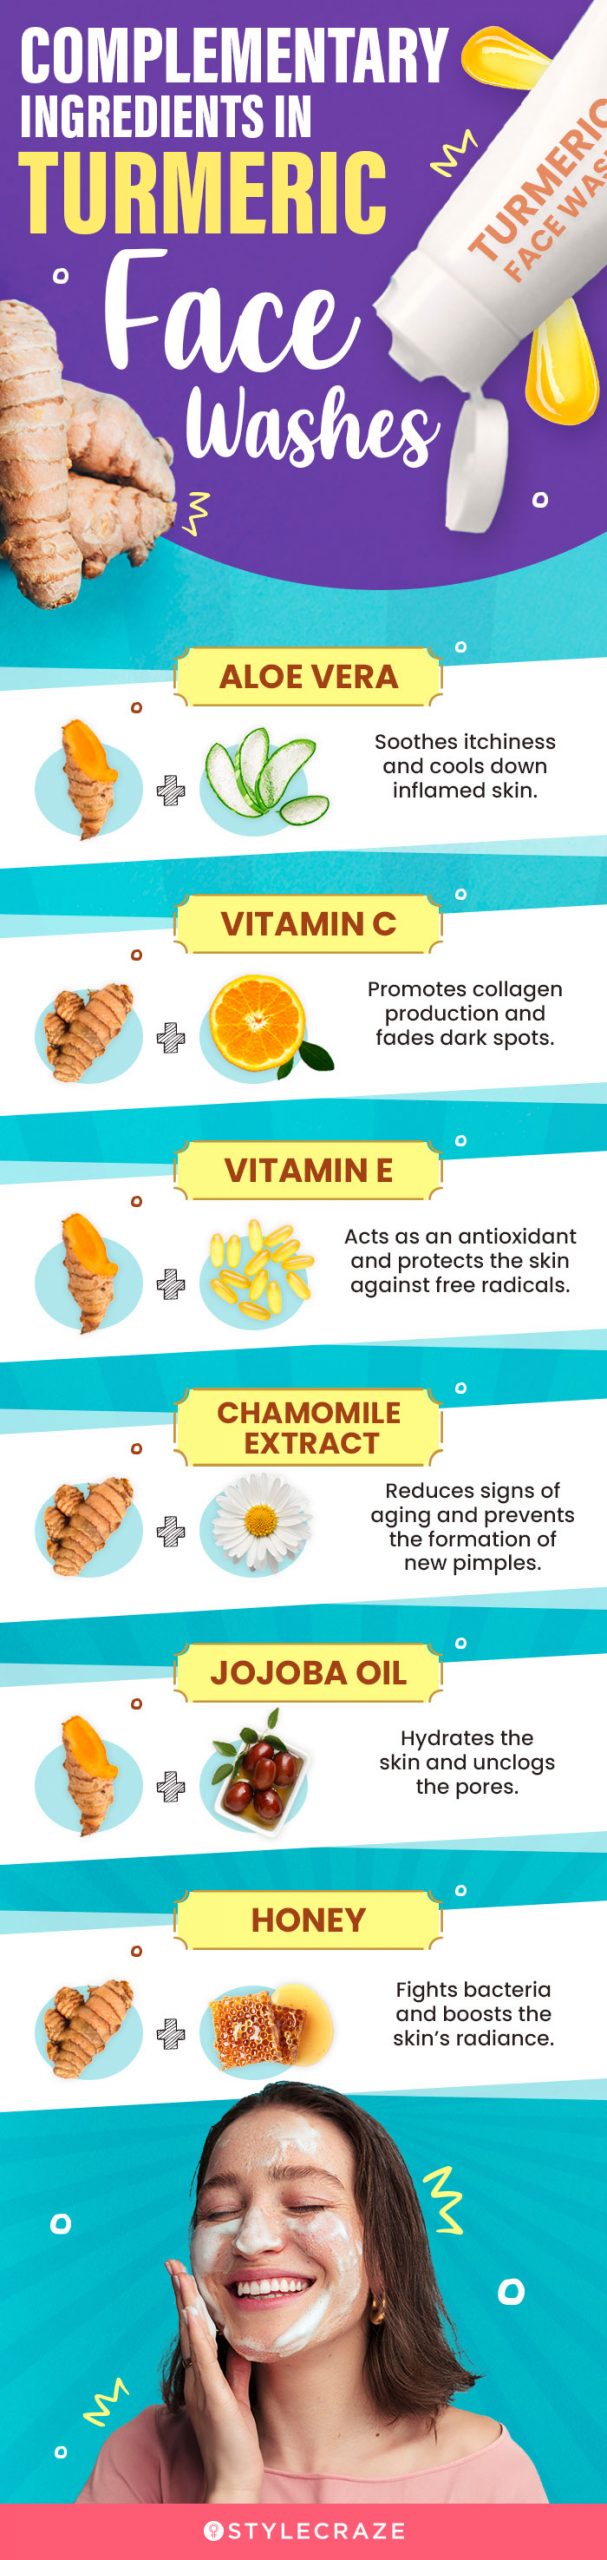 Complementary Ingredients In Turmeric Face Washes (infographic)